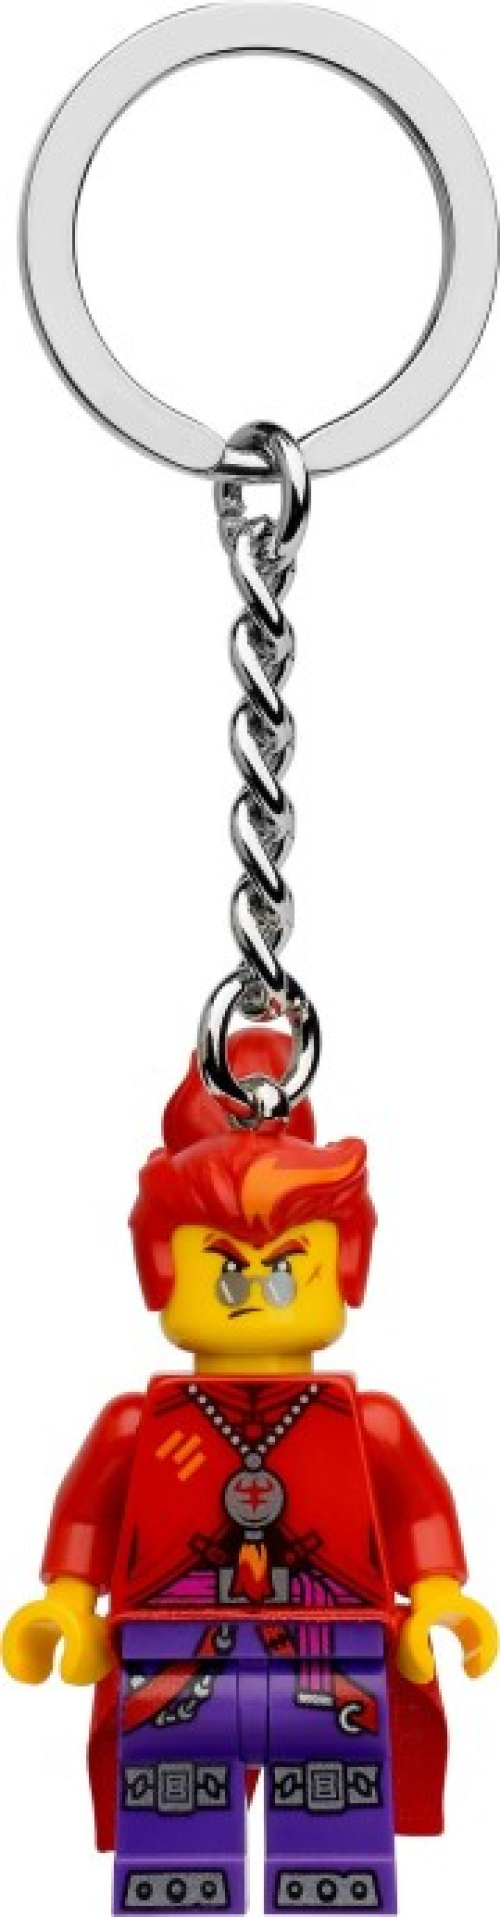 854086-1 Red Son Key Chain